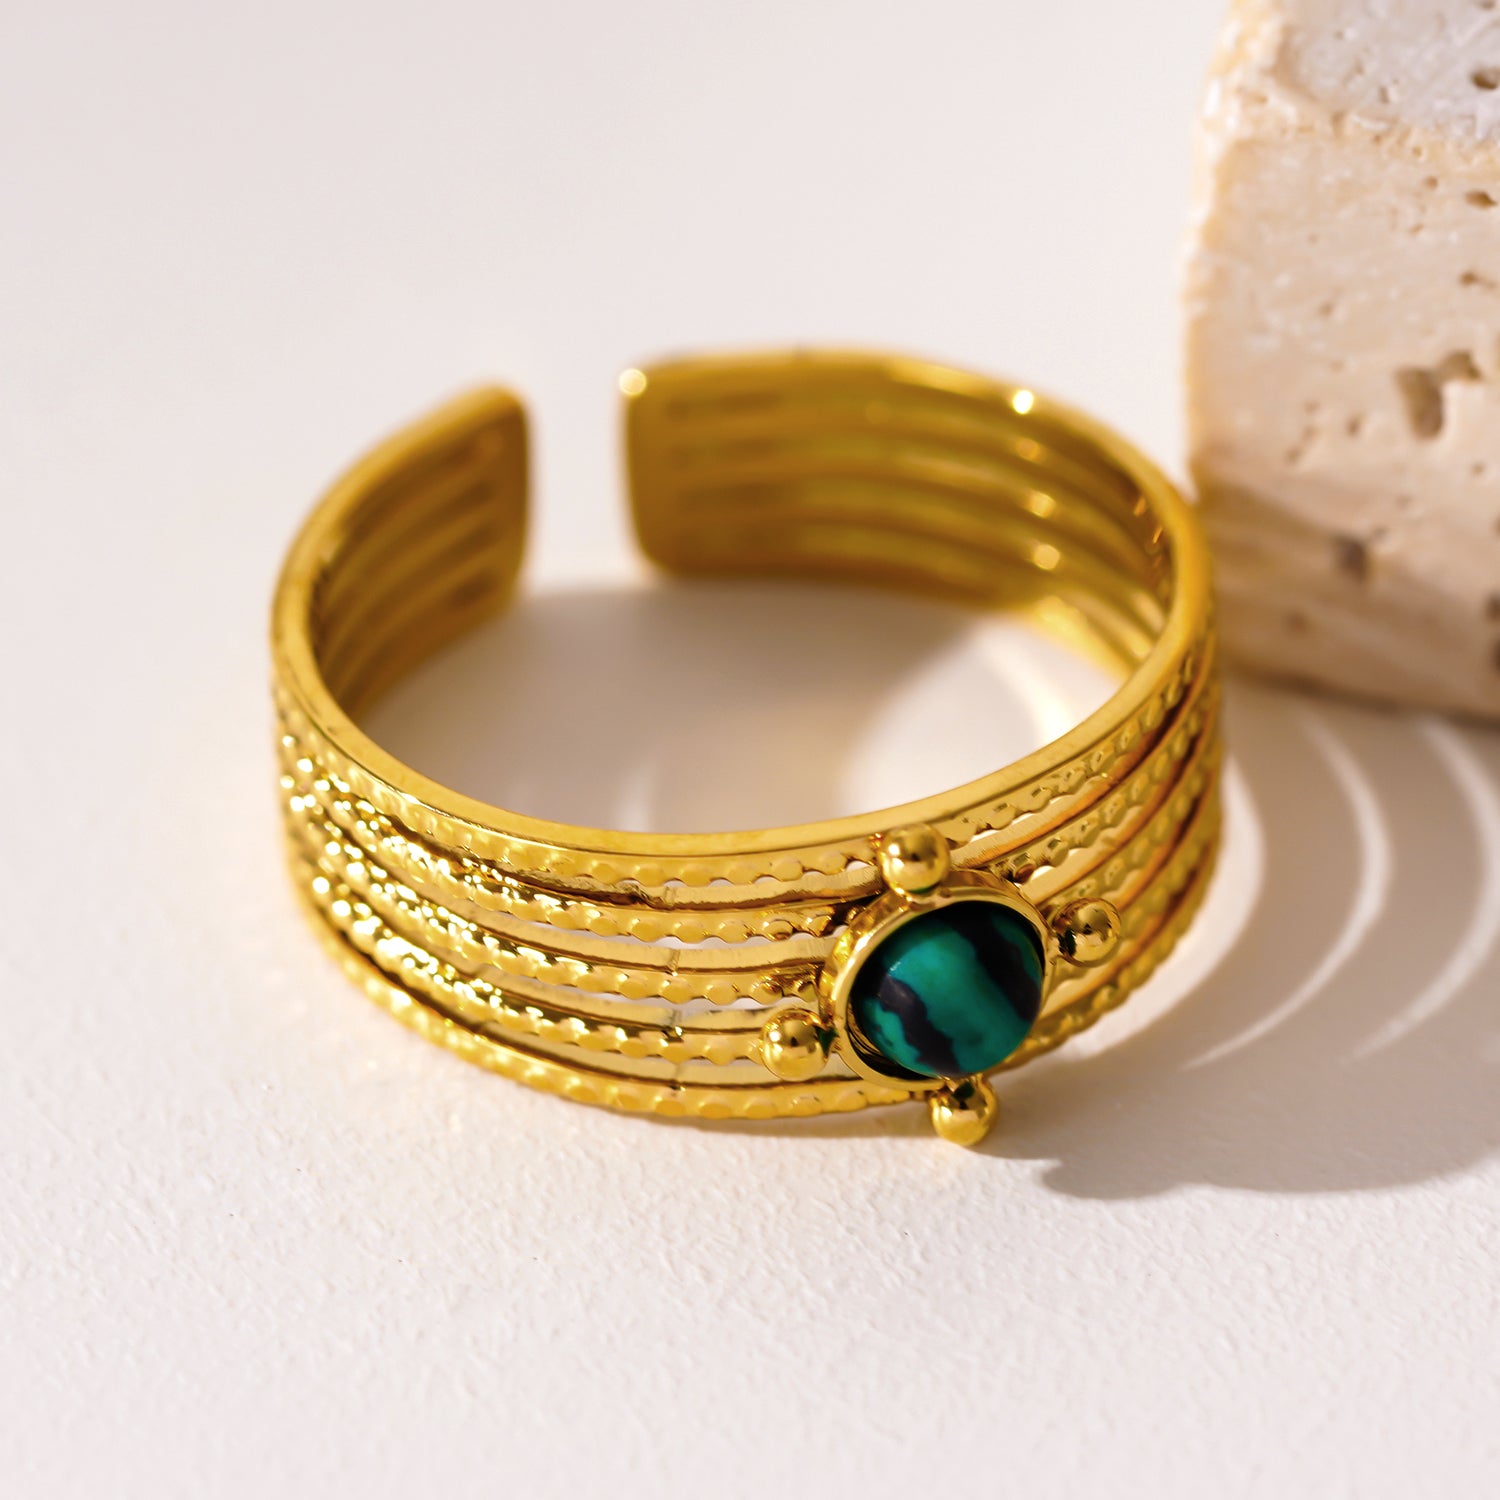 Style CHARMA 1996: 5-Layer Circle Embossed Ring with a Malachite Stone Centre Piece.